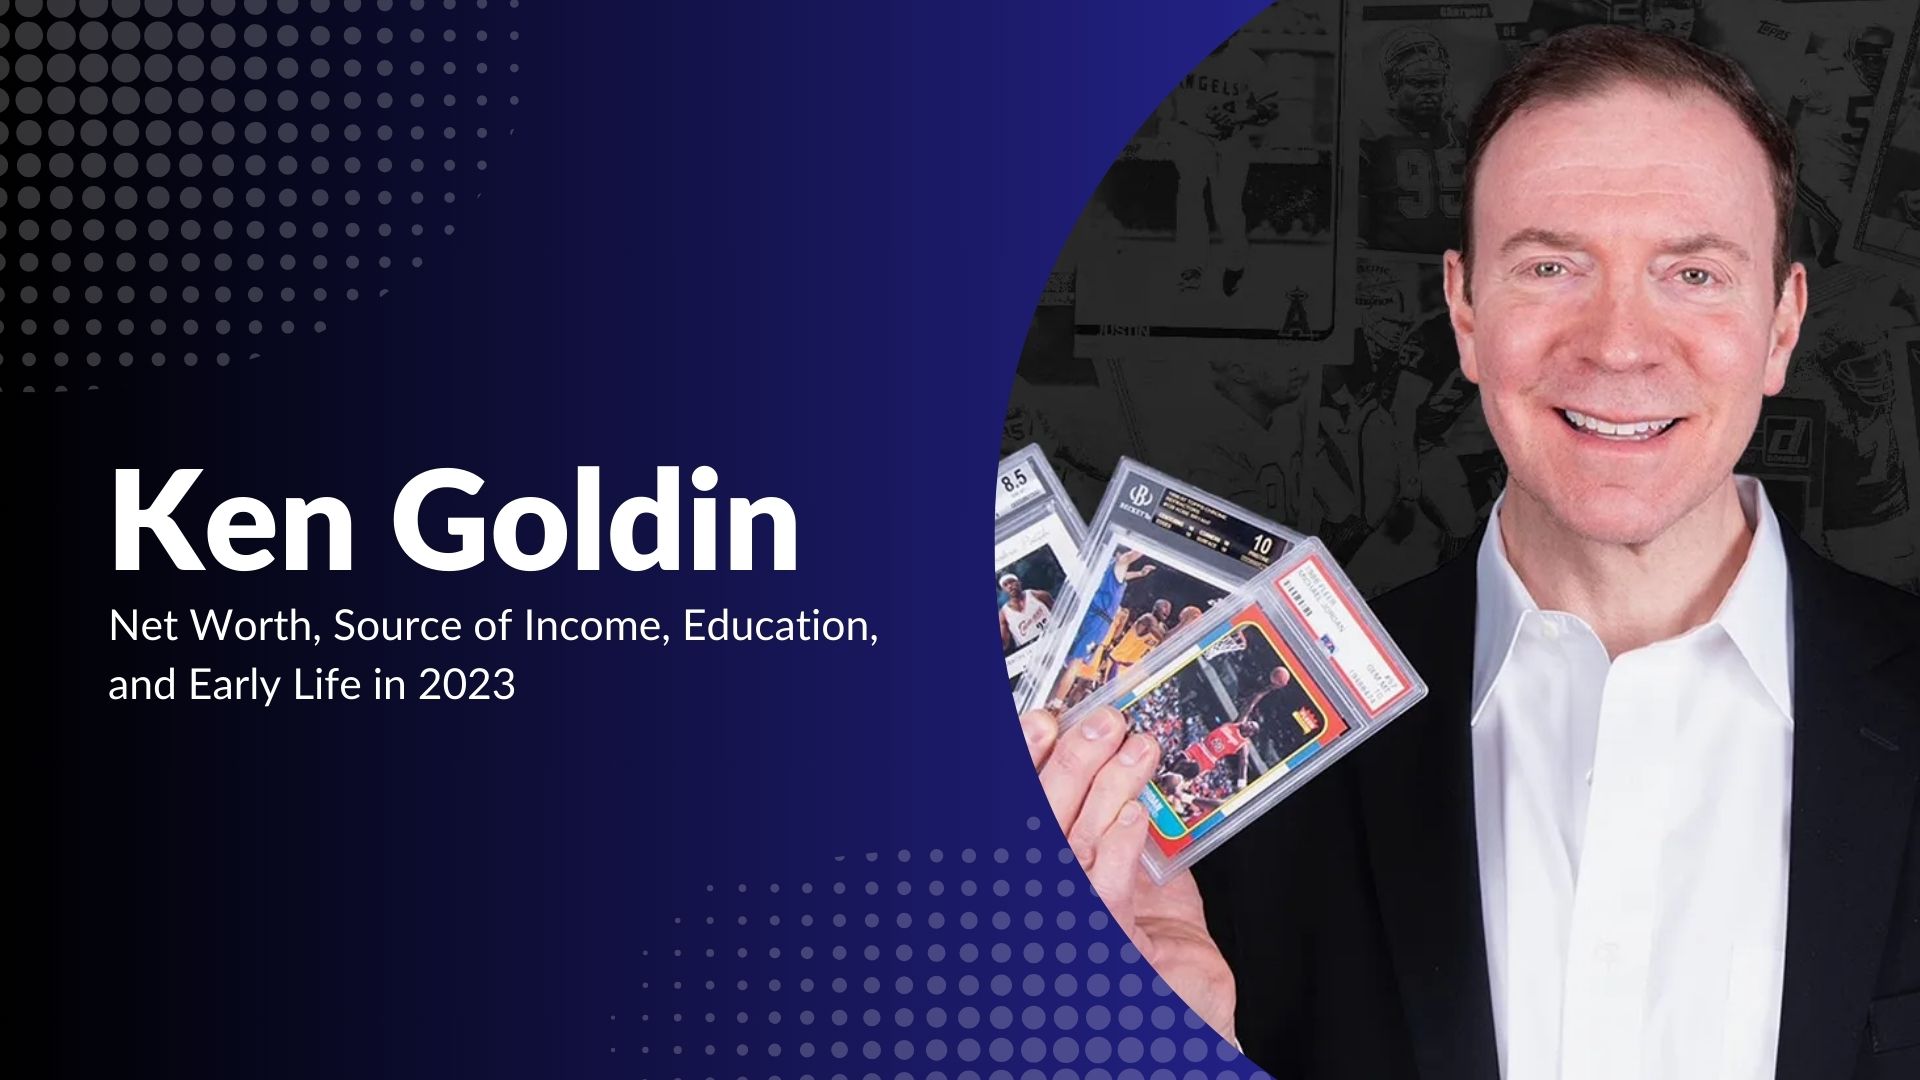 Ken Goldin Net Worth, Source of Income, Education, and Early Life in 2023